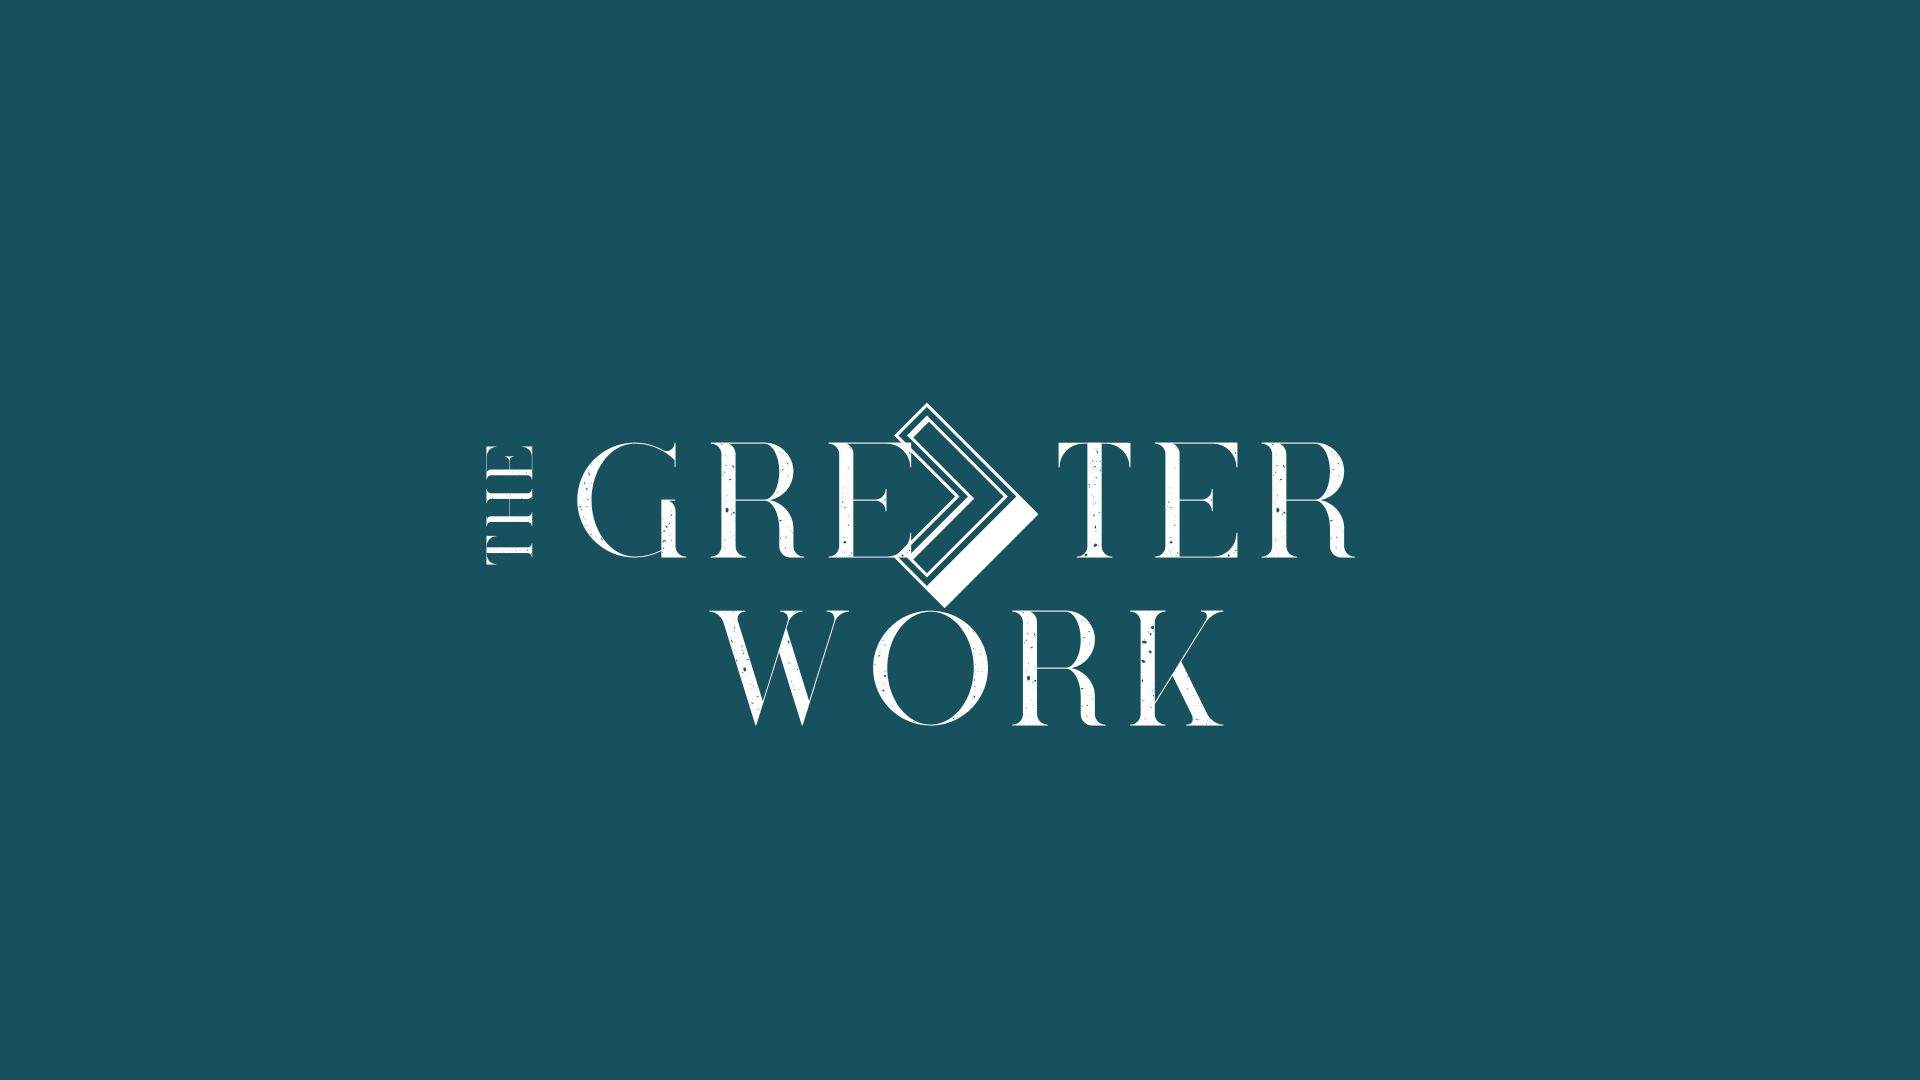 Why Pray? - The Greater Work Sermon Series